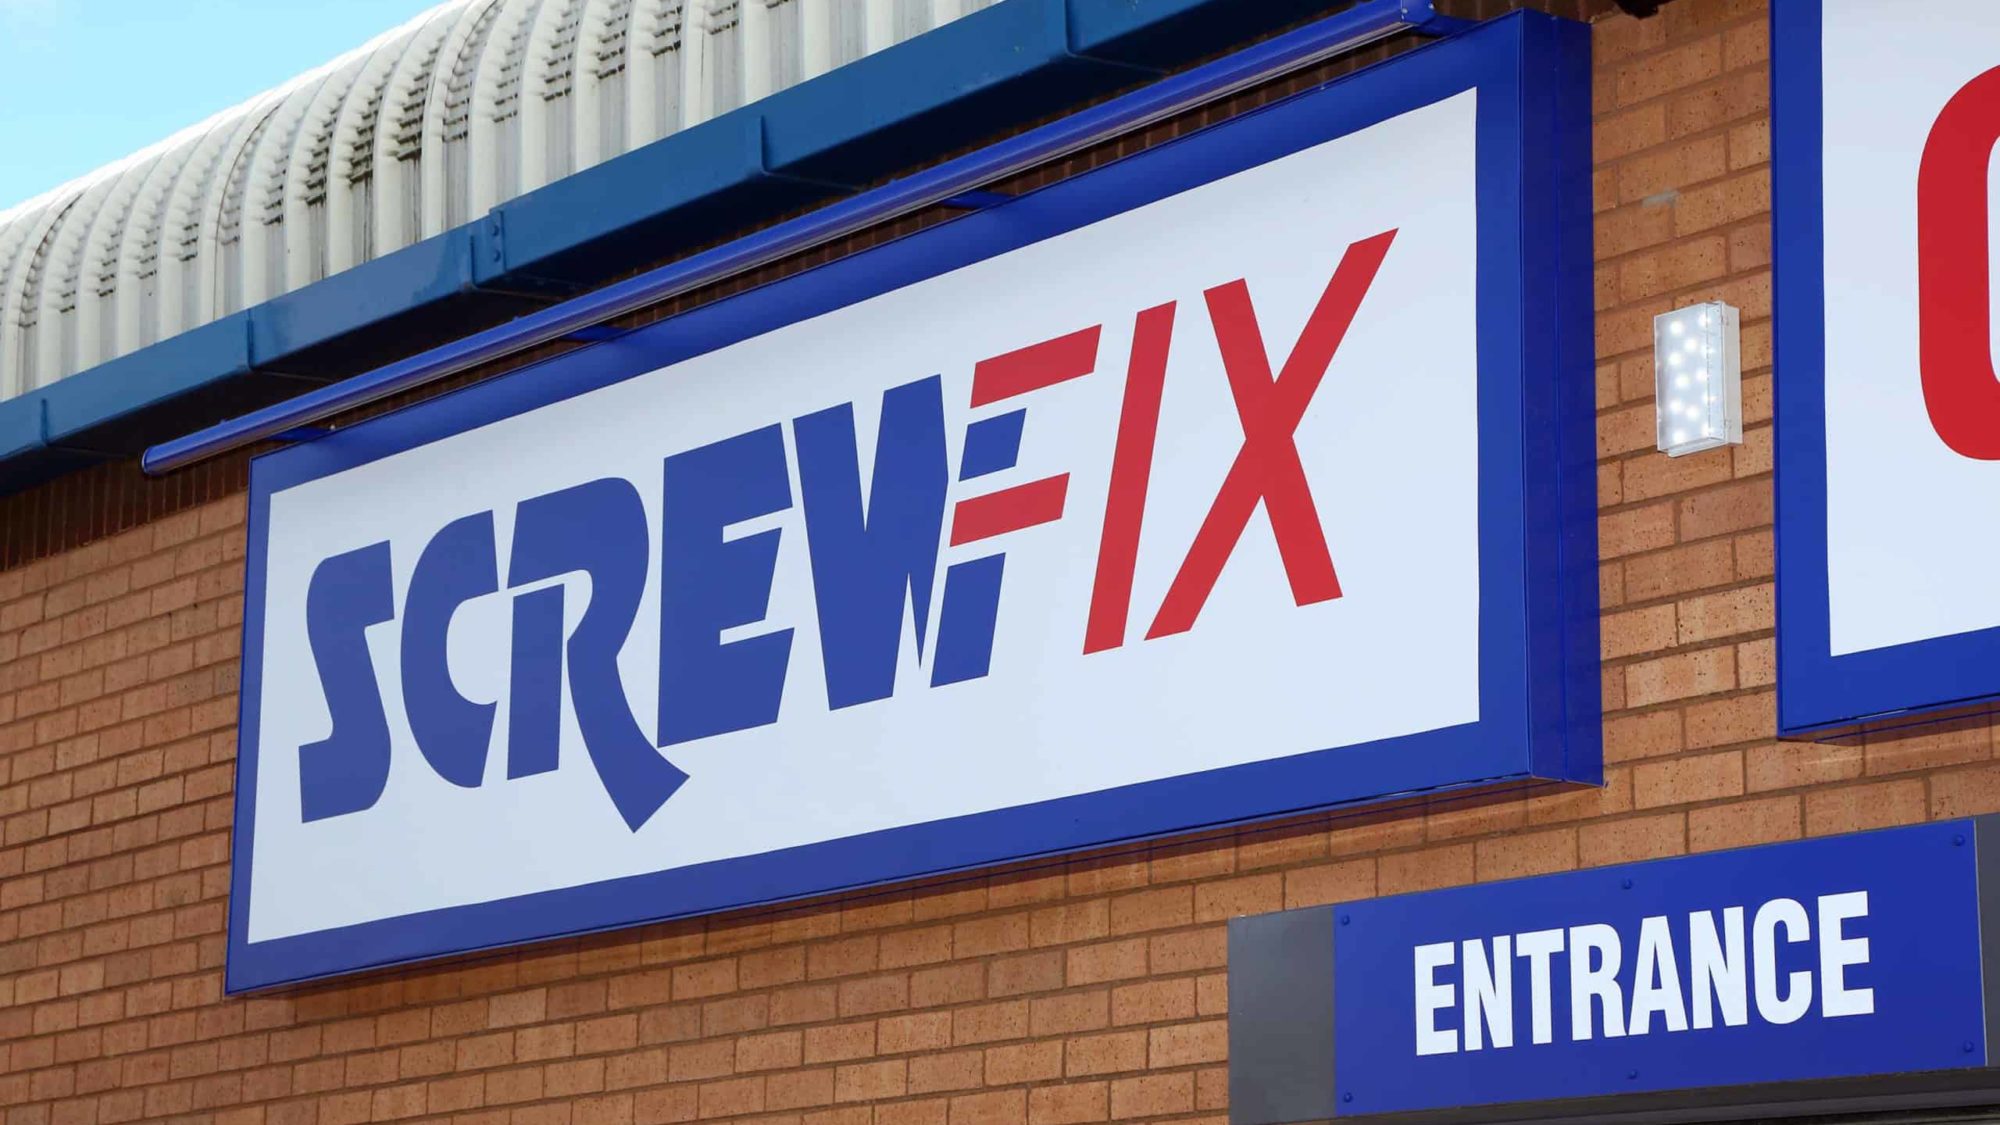 Screwfix increases its store estate